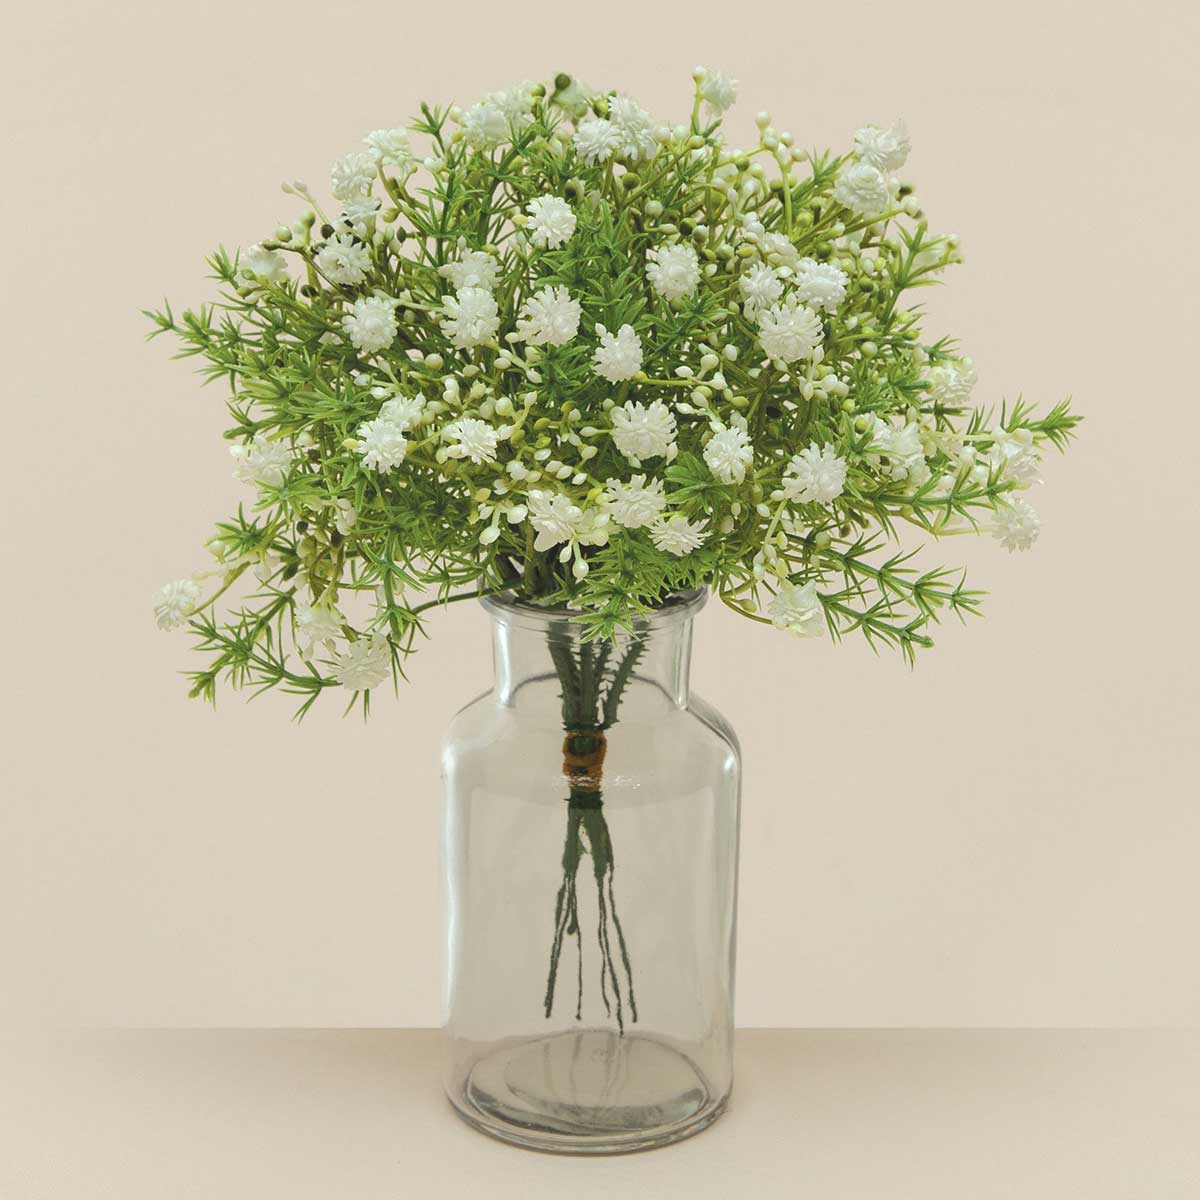 BUNDLE OF 6 FLOWERING GRASS 8IN X 9.5IN GREEN/WHITE - Click Image to Close